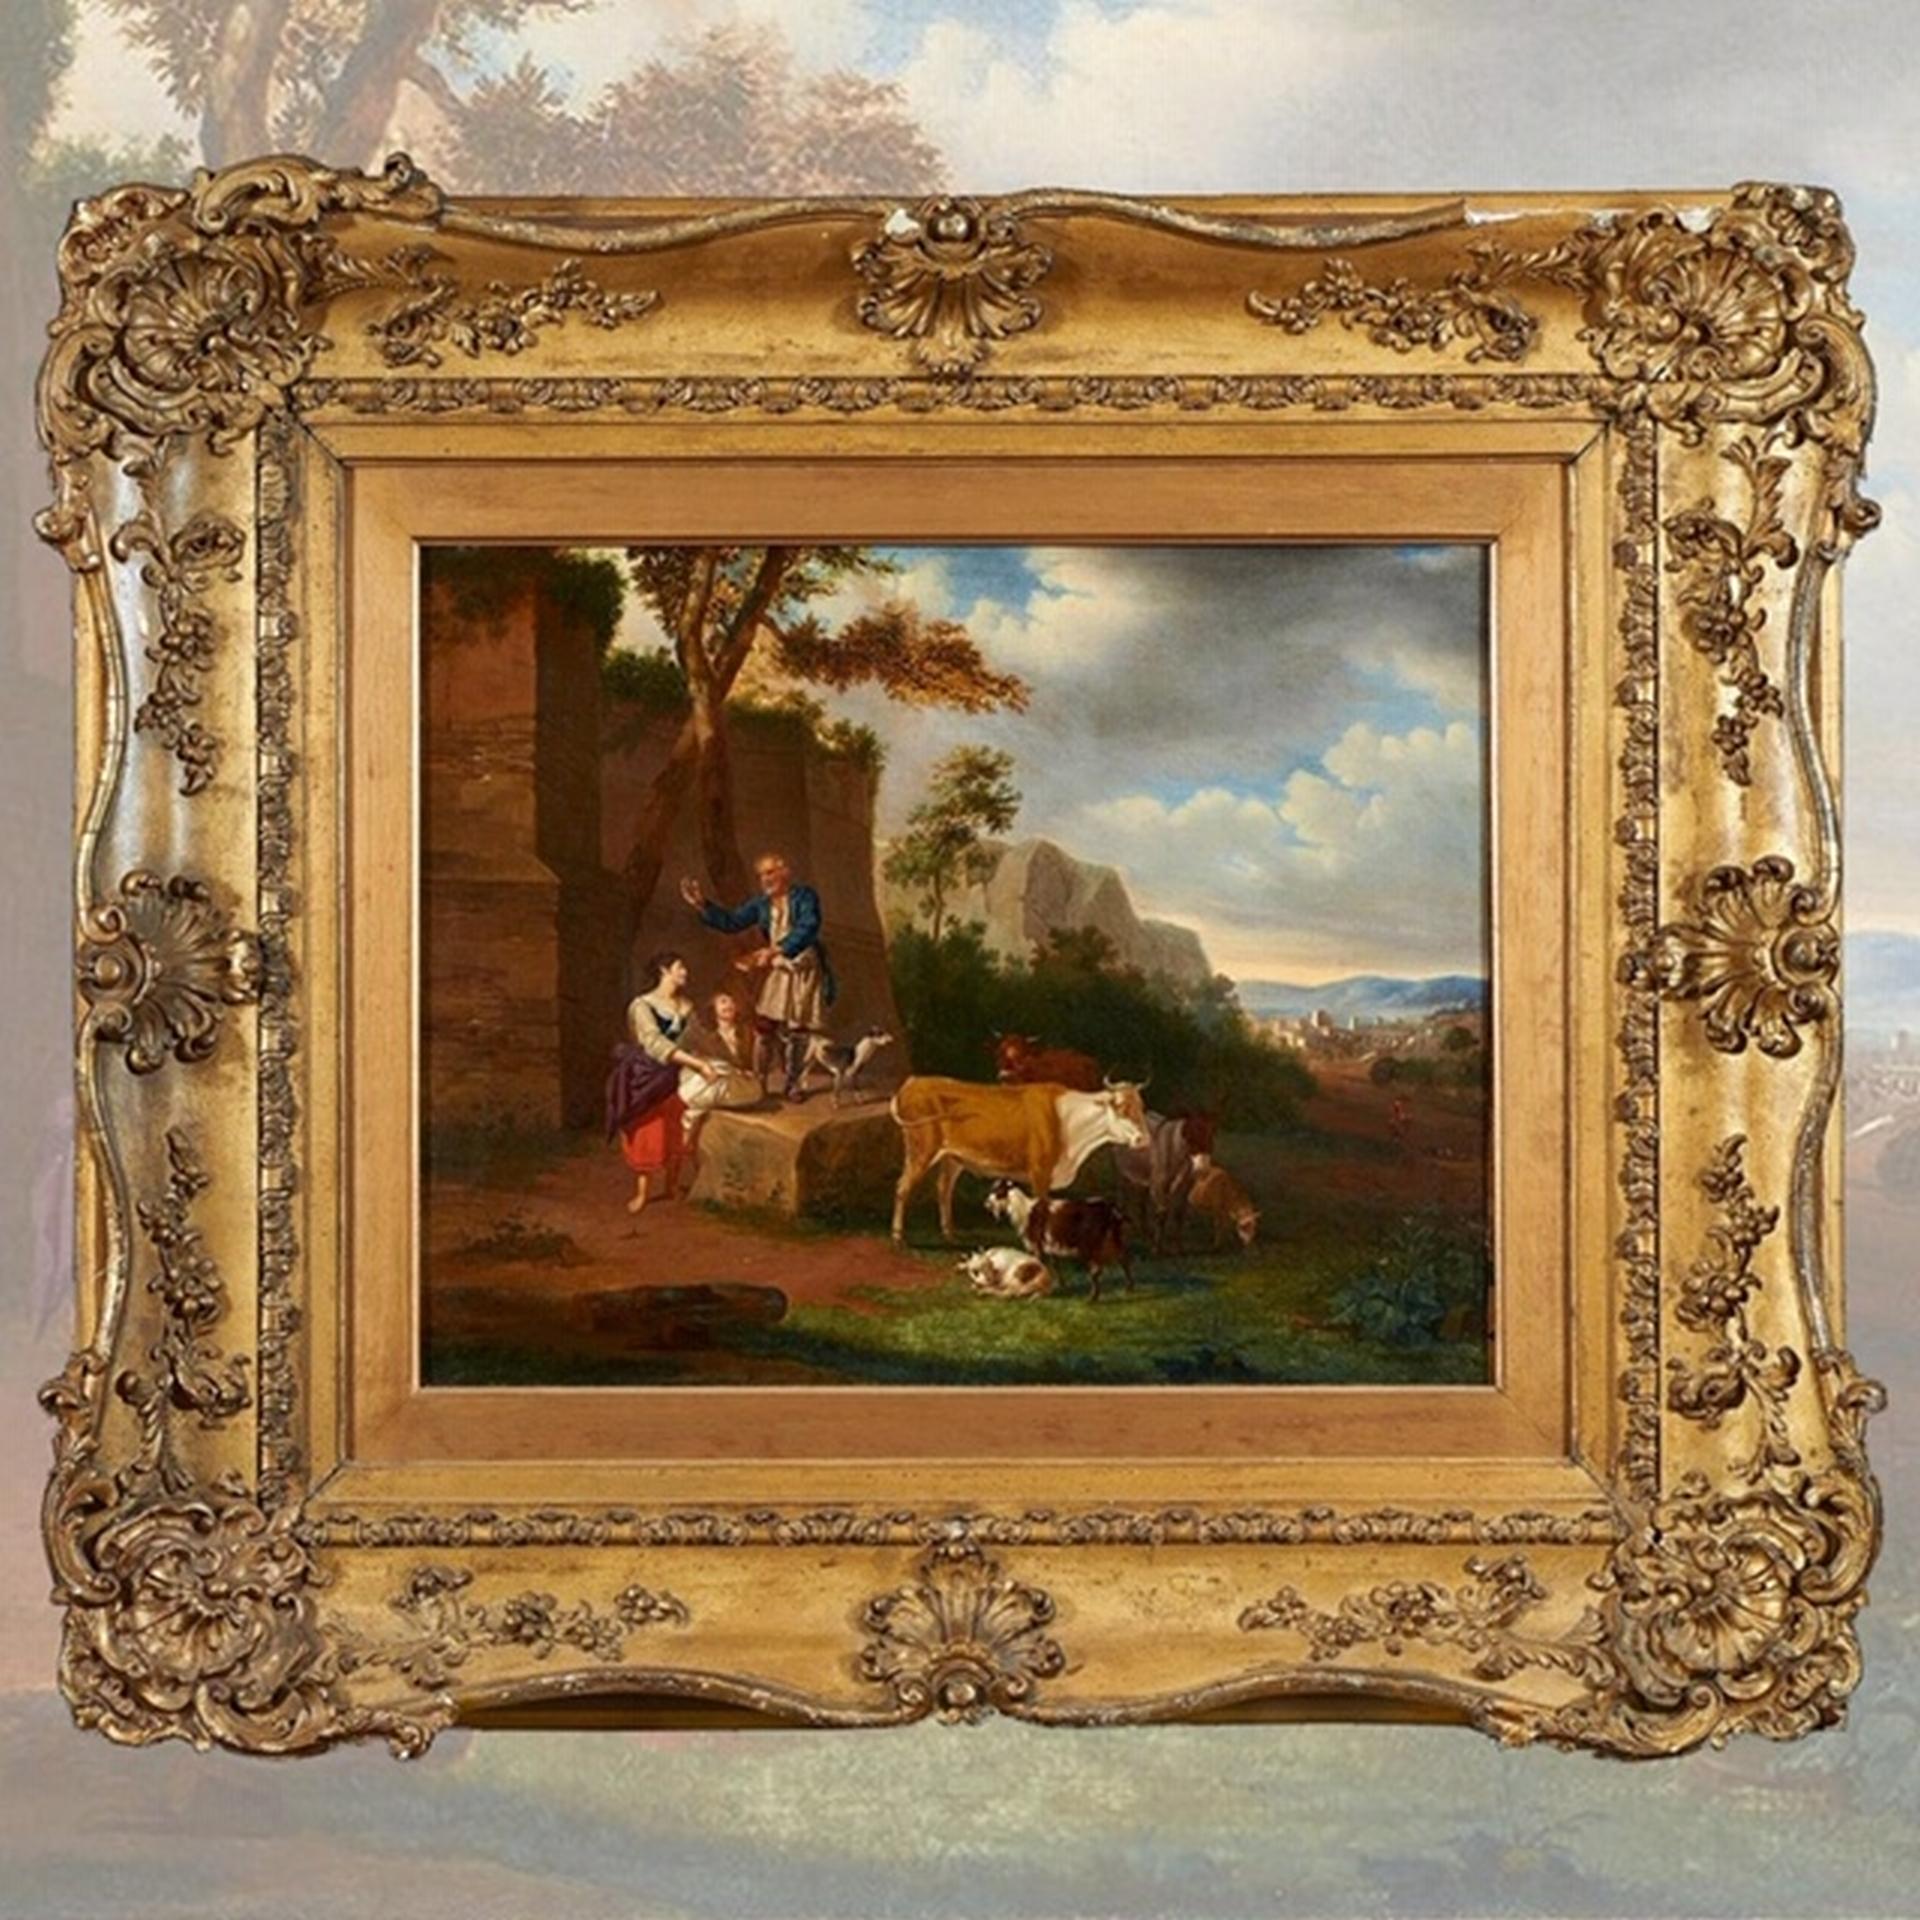 Belgian Paesaggio 18th Century Oil on Canvas Schaetzell Signed 1783 Landscape Painting